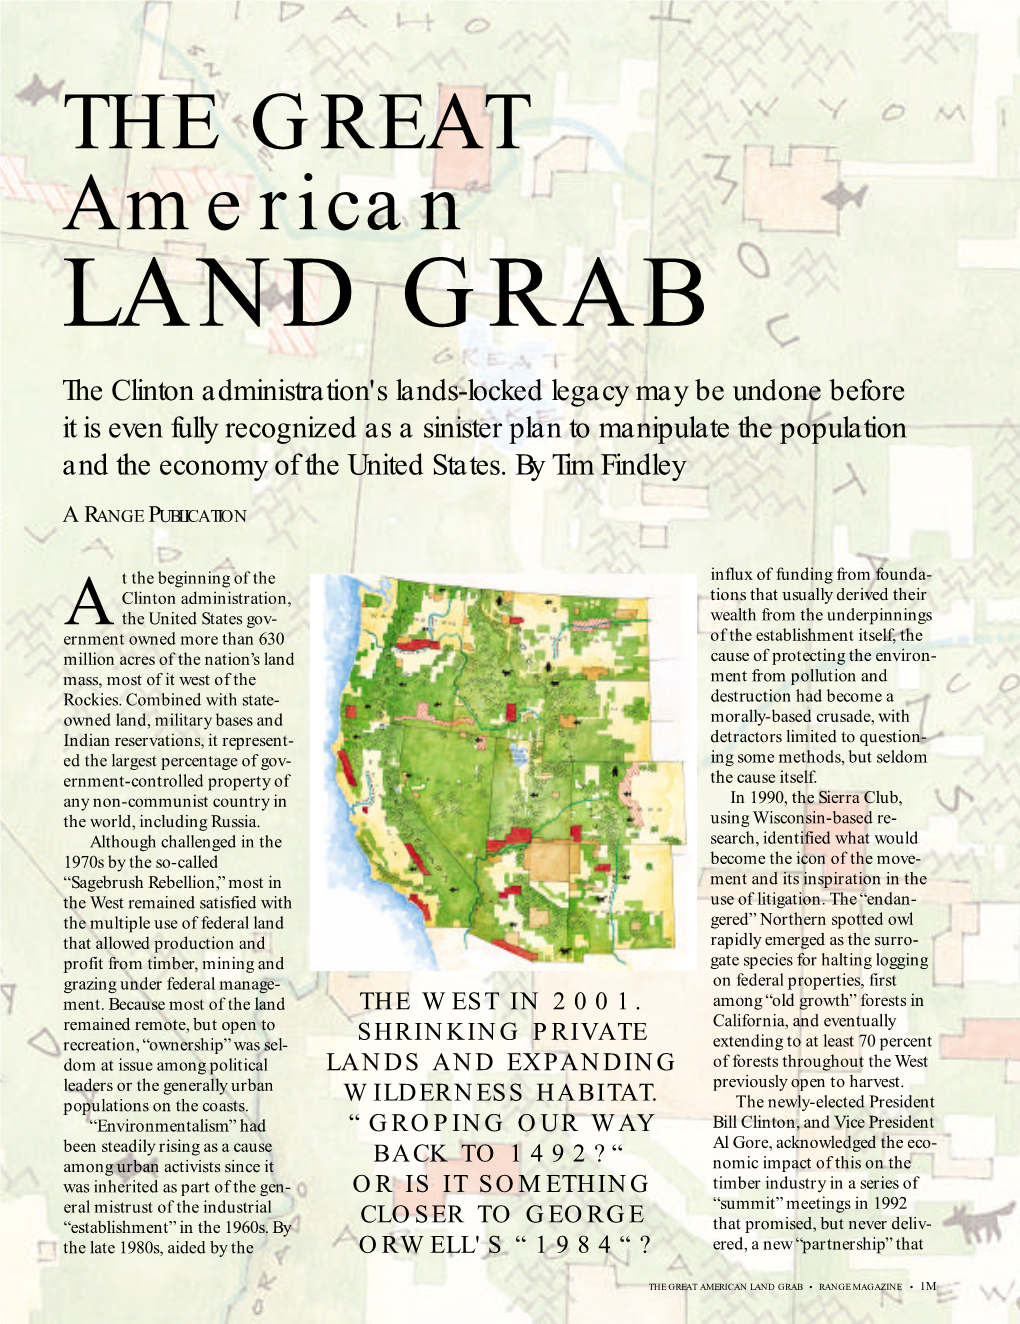 The Great American Land Grab